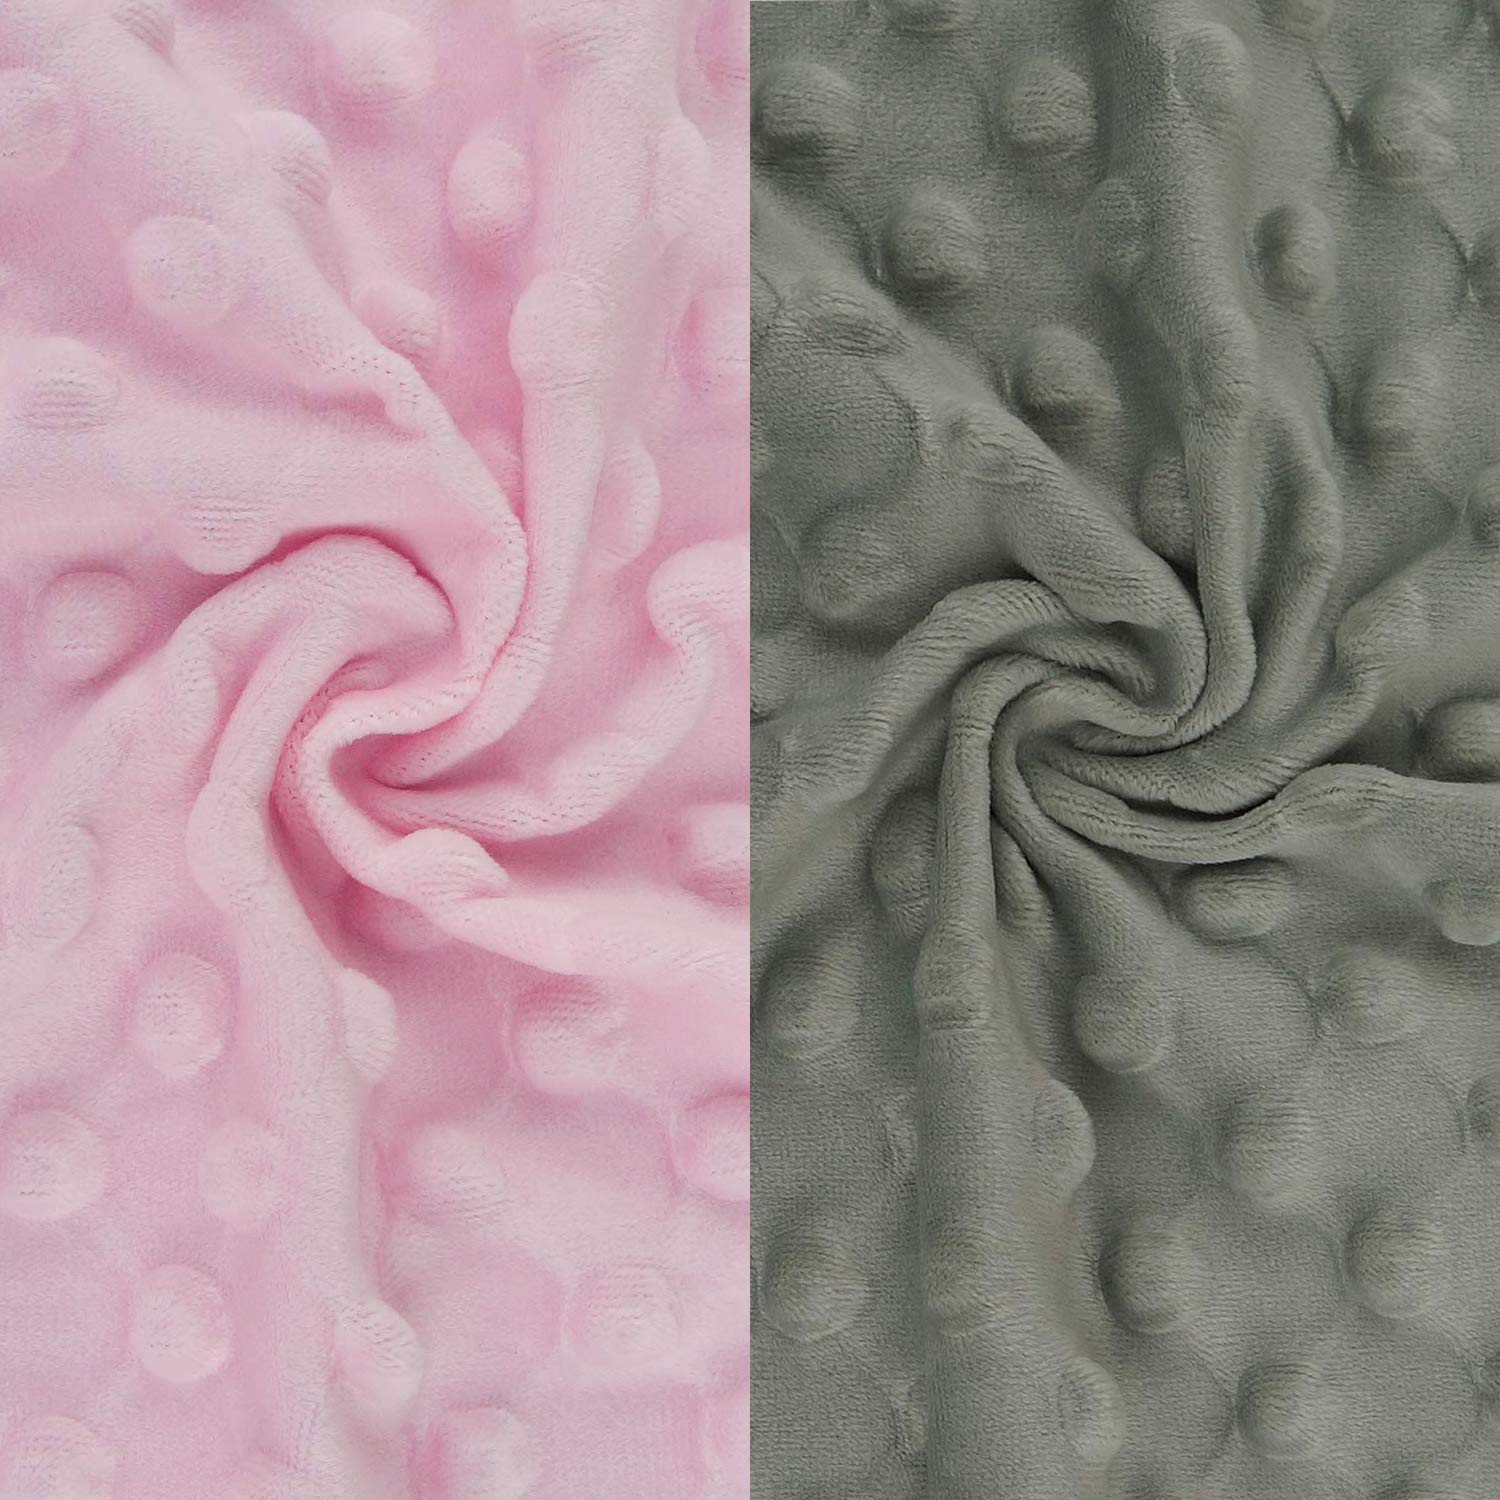 BlueSnail Ultra Soft Minky Dot Changing Pad Cover 2 Pack (Gray+Pink, 2 Pack)